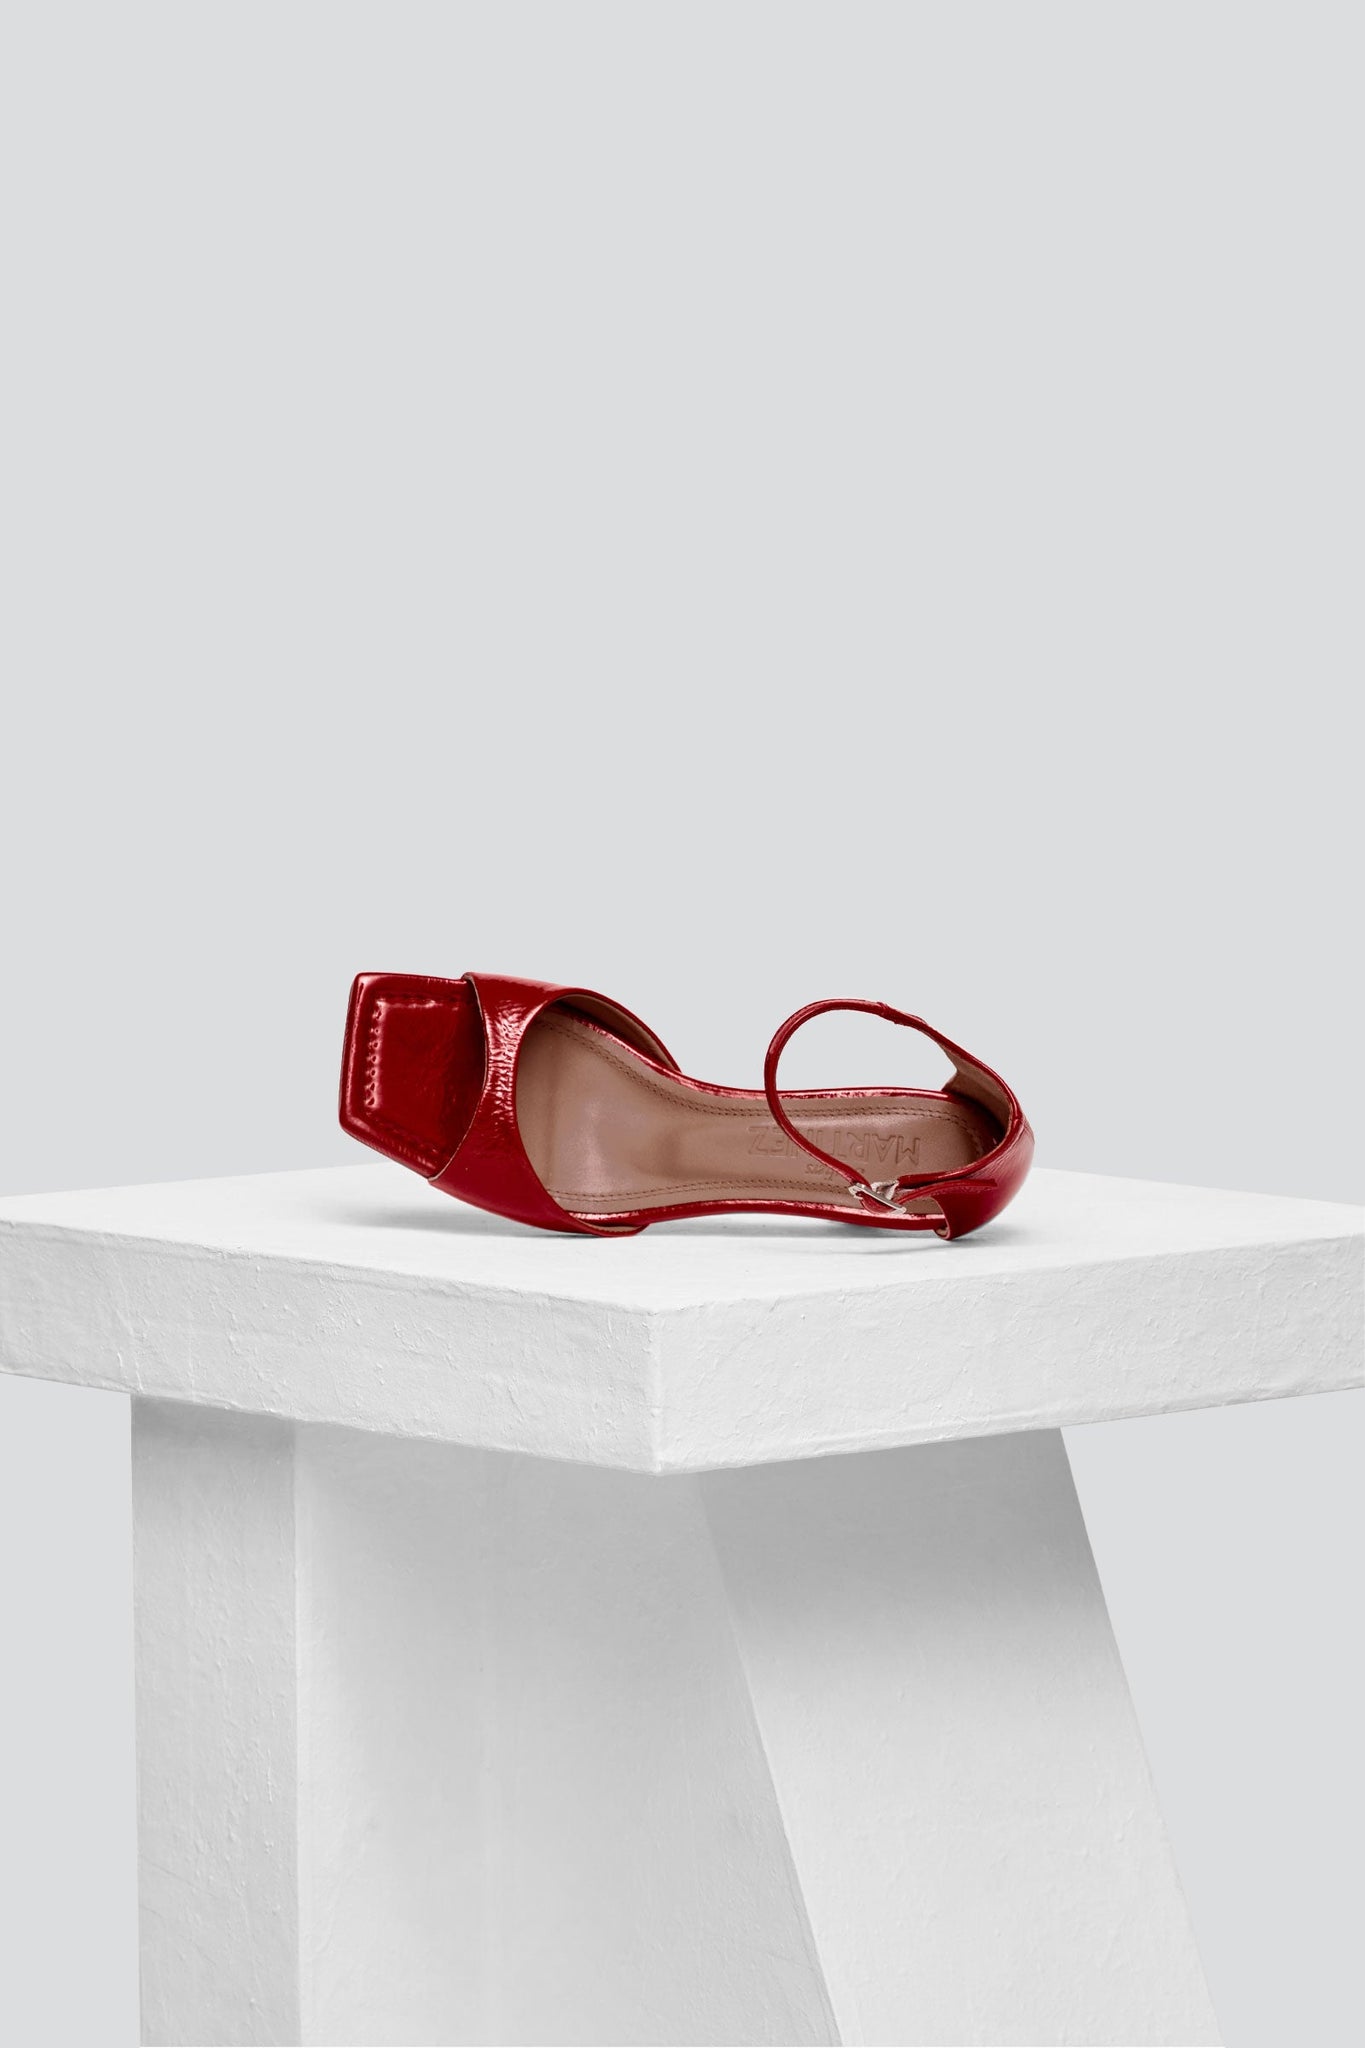 Souliers Martinez Shoes KIKA - Red Patent Leather Sandals 